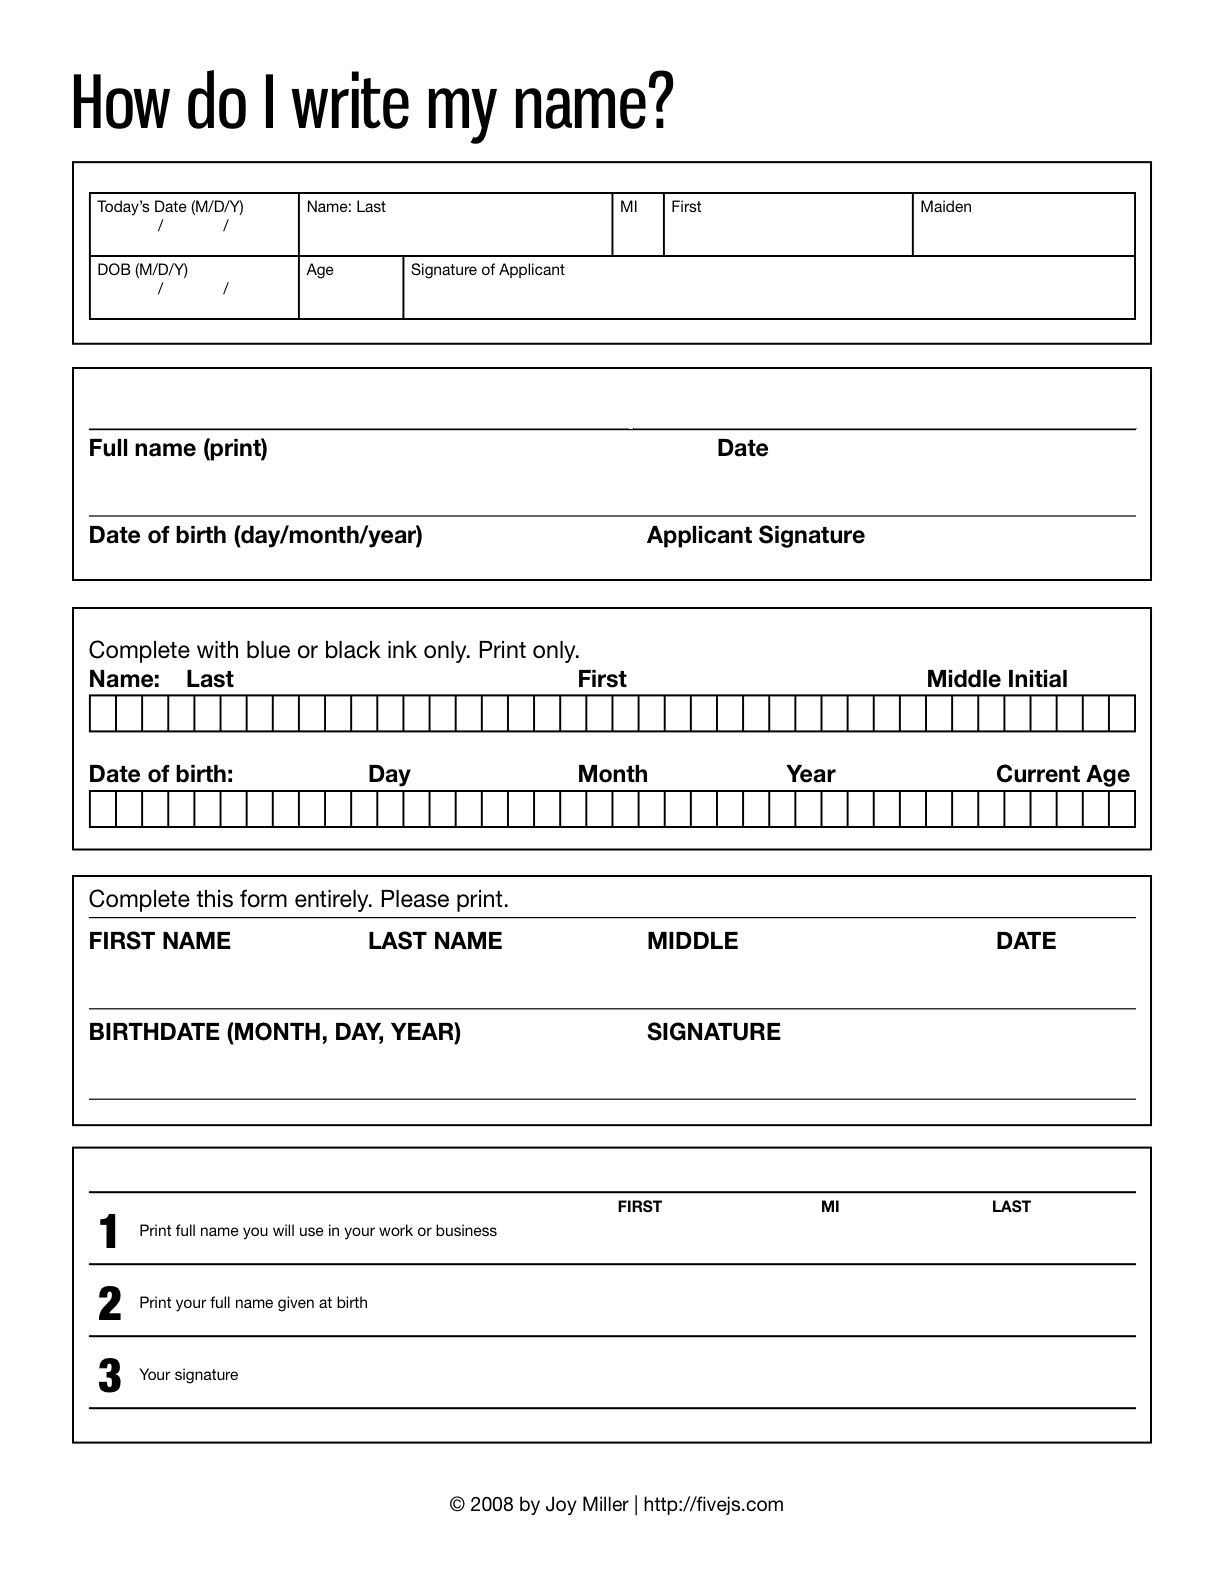 teaching-children-how-to-fill-out-forms-five-j-s-homeschool